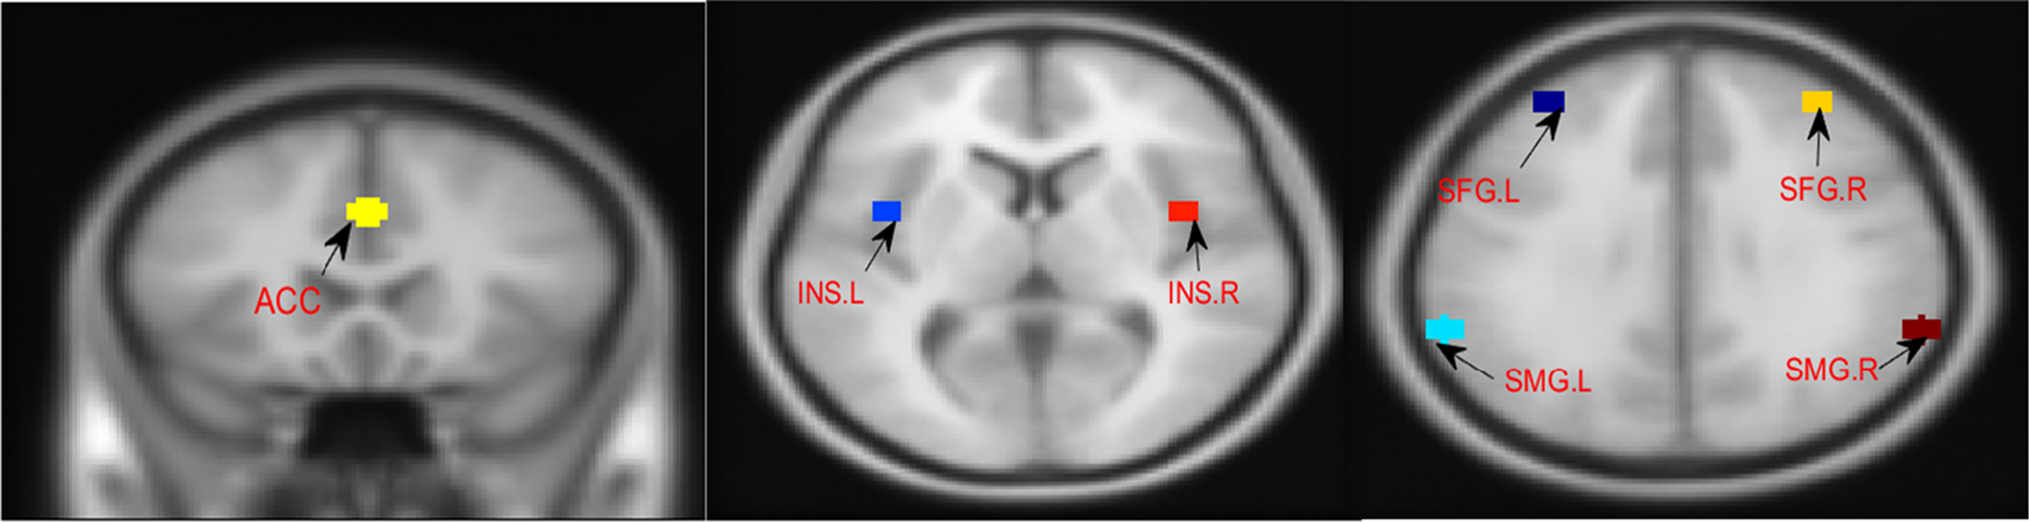 Increased functional connectivity within the salience network in patients with insomnia